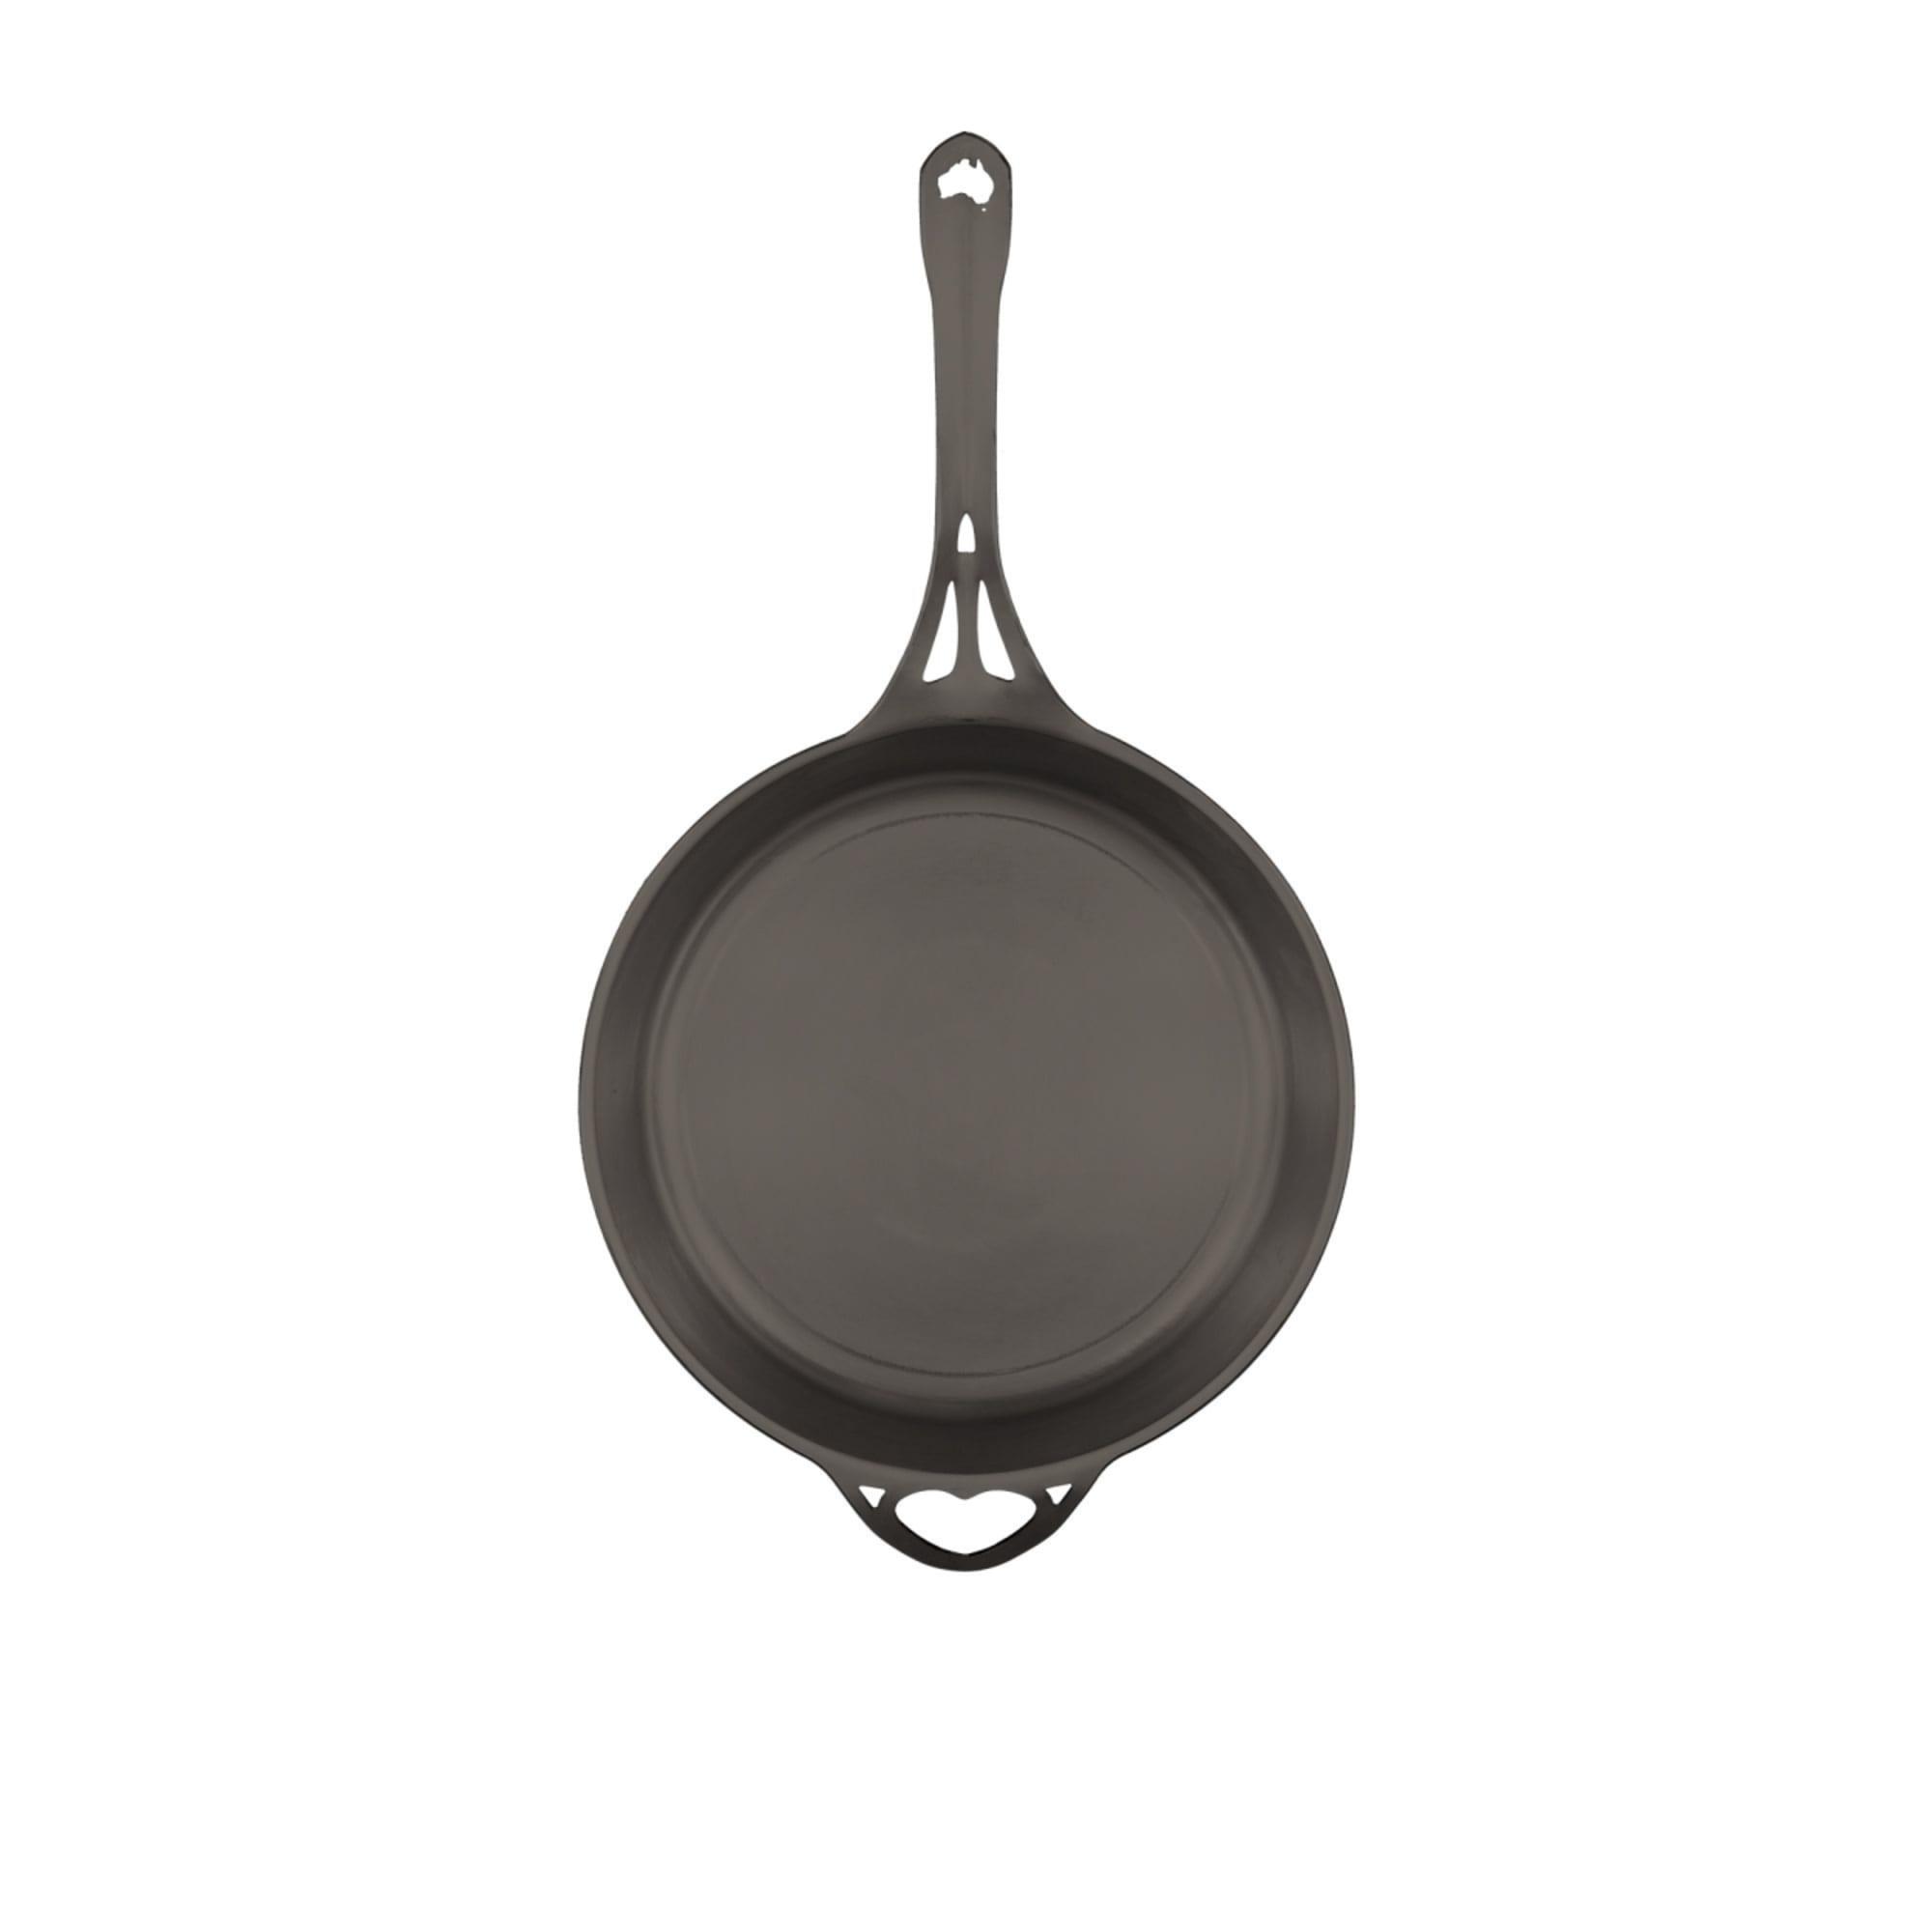 Solidteknics AUS-ION Frypan with Quenched Finish 30cm Image 2